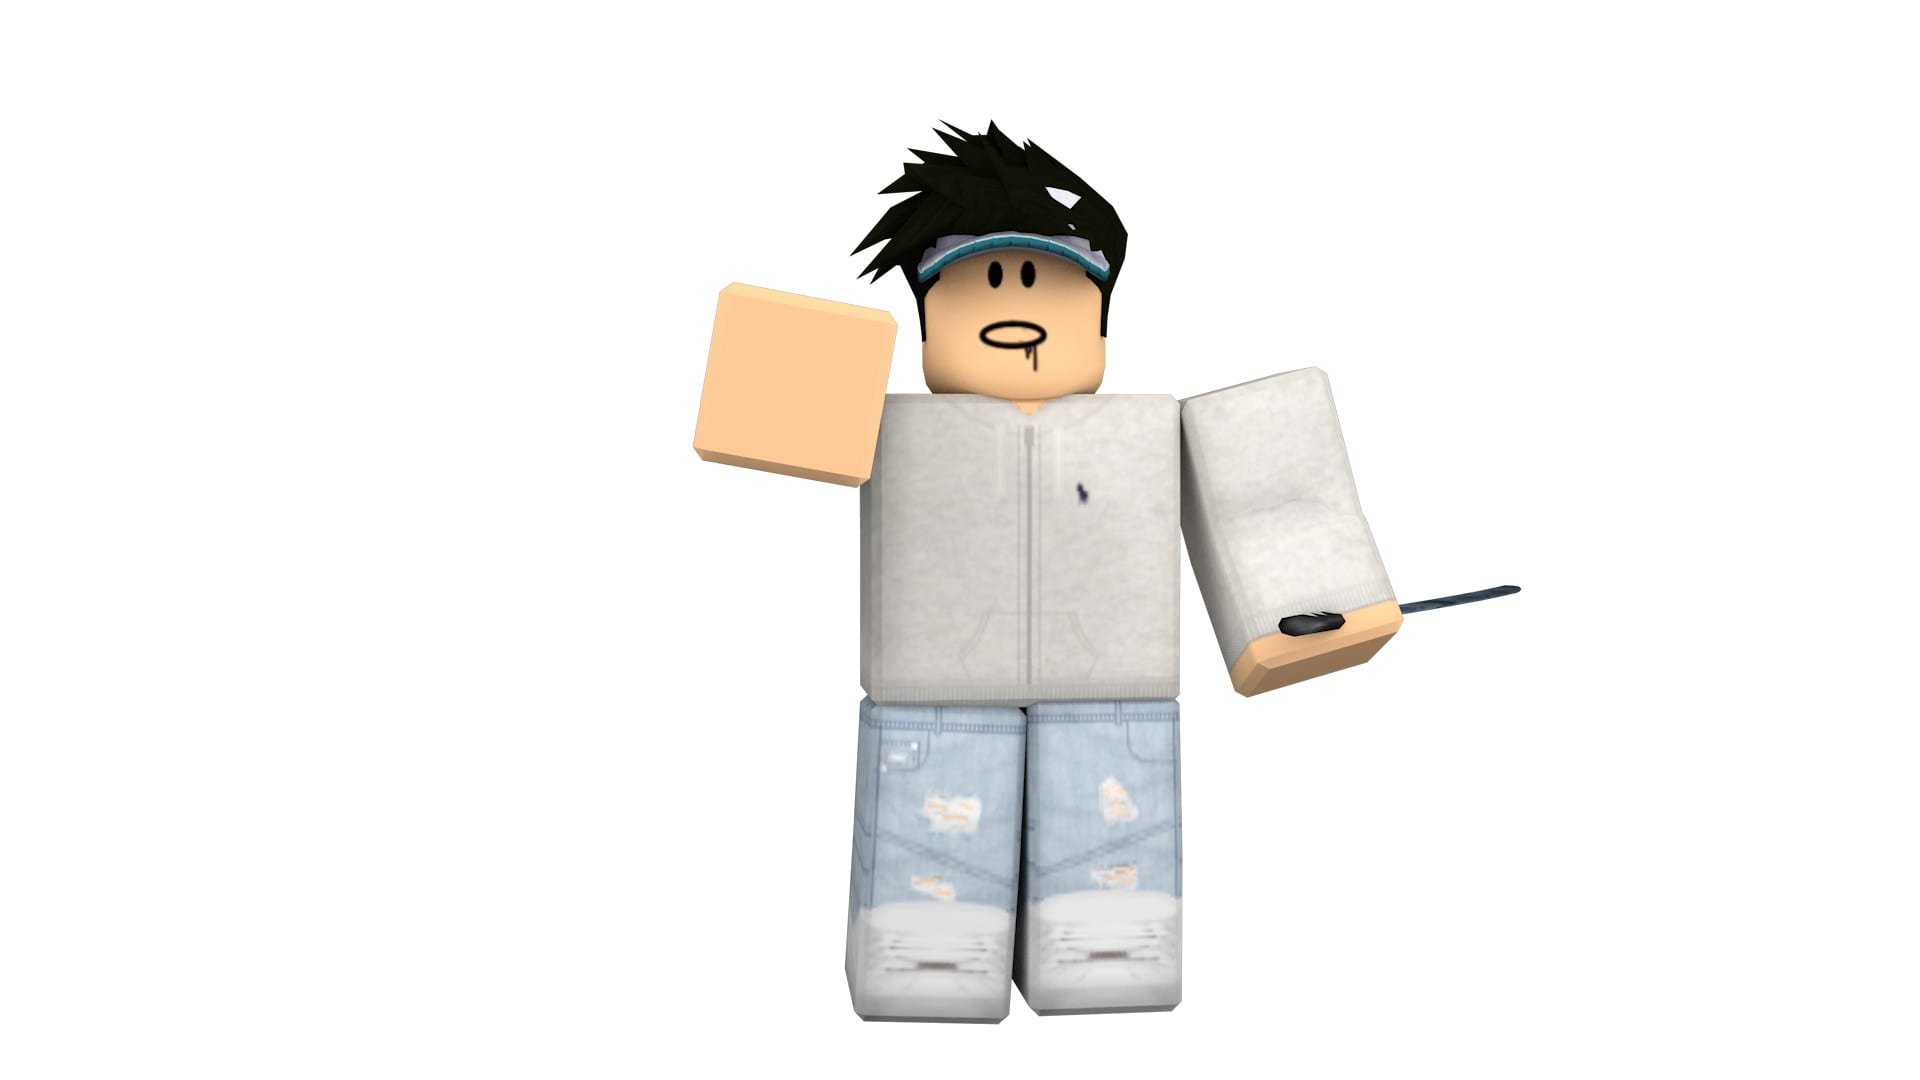 Get Your Own Roblox Gfx By Fruitymoon Fiverr - roblox character poses